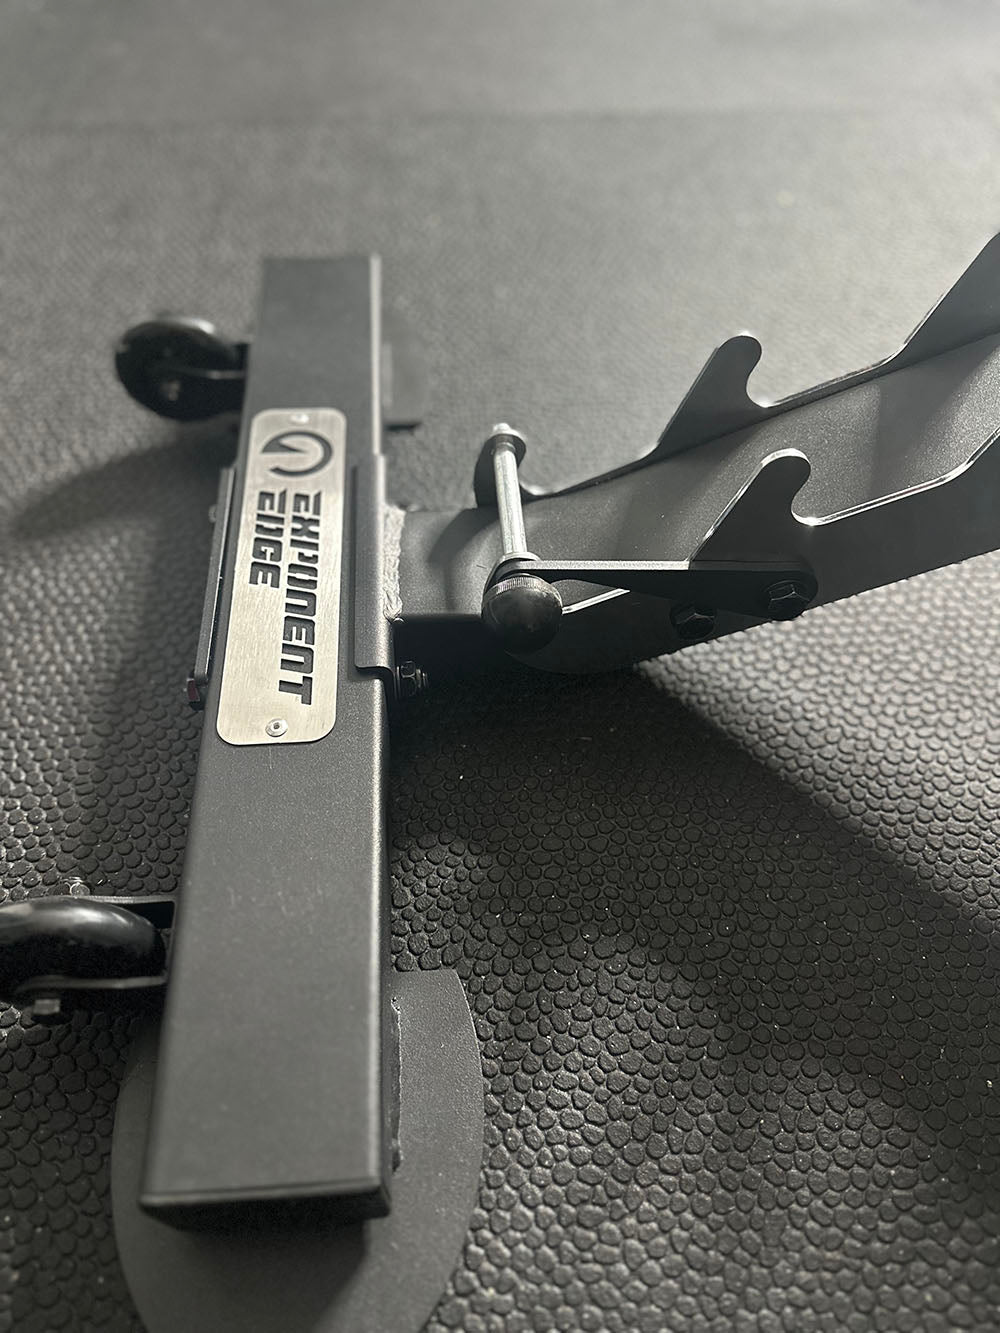 The Edge Infinity Bench is a bench that combines three separate benches all into one bench. You get the benefits of a flat bench, incline bench, and half bench all in one device. This image shows a close of view of one of the support legs with the Exponent Edge logo engraved..